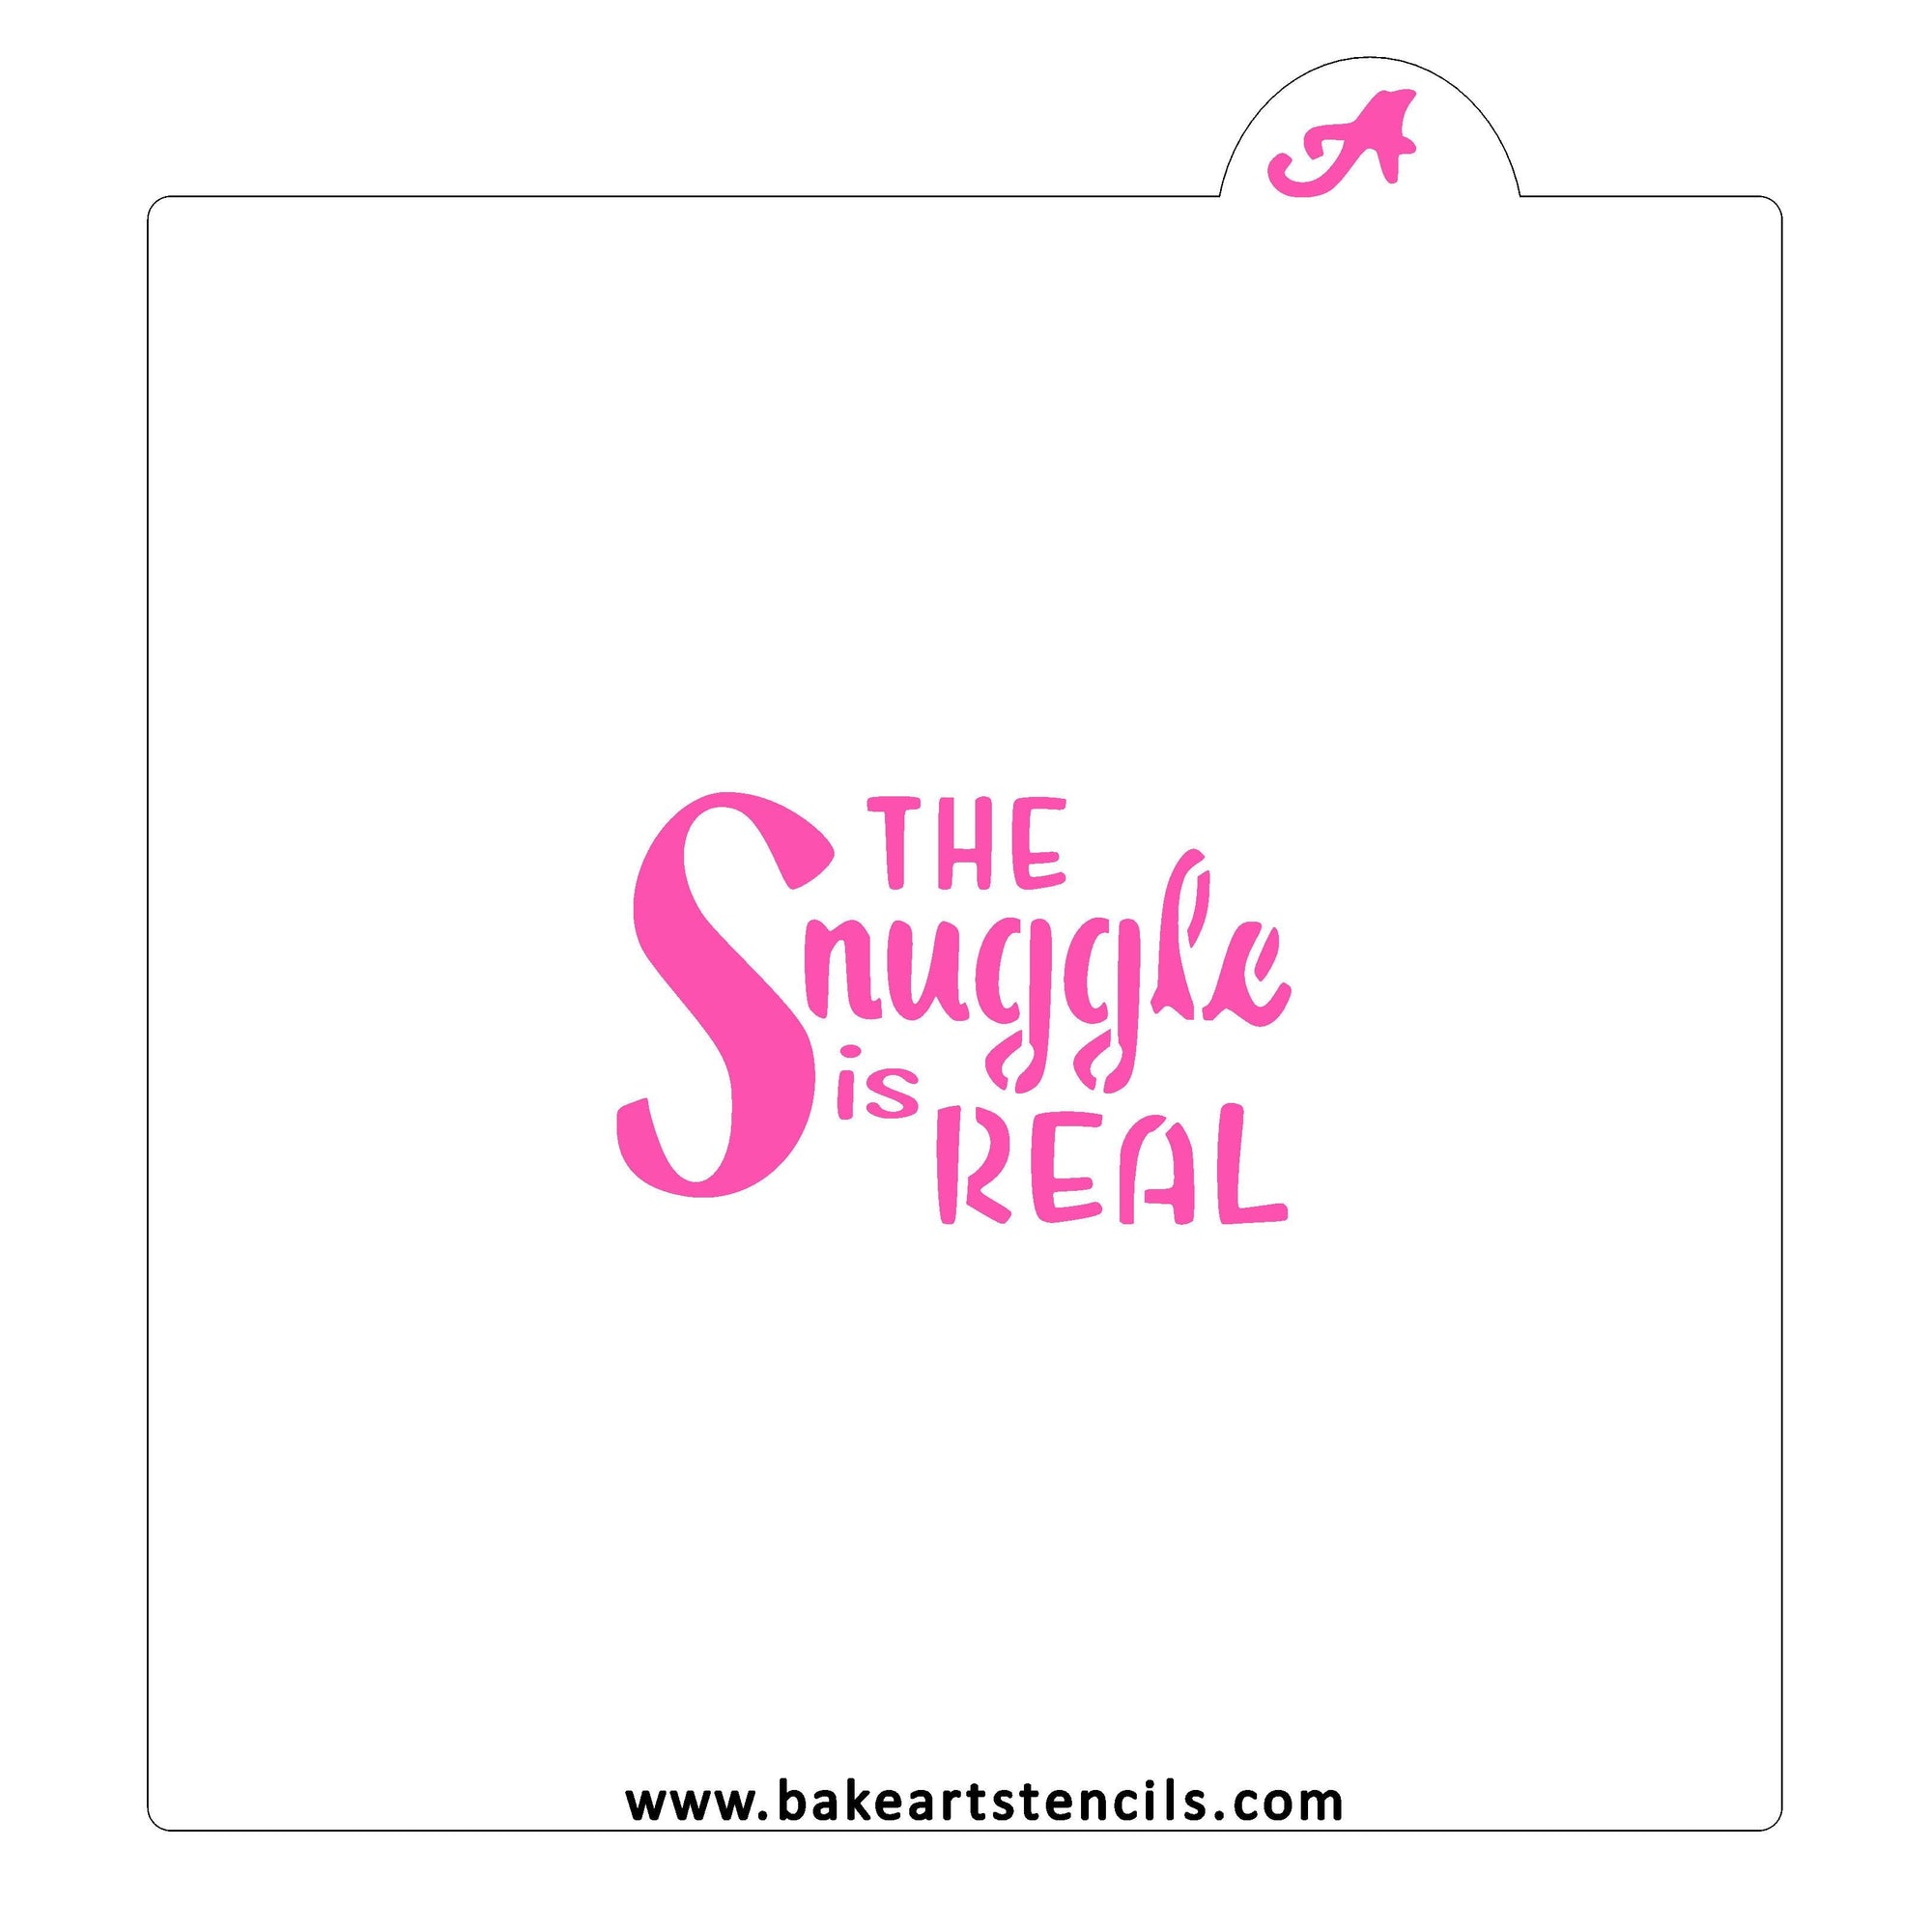 The Snuggle is Real Cookie Stencil bakeartstencil